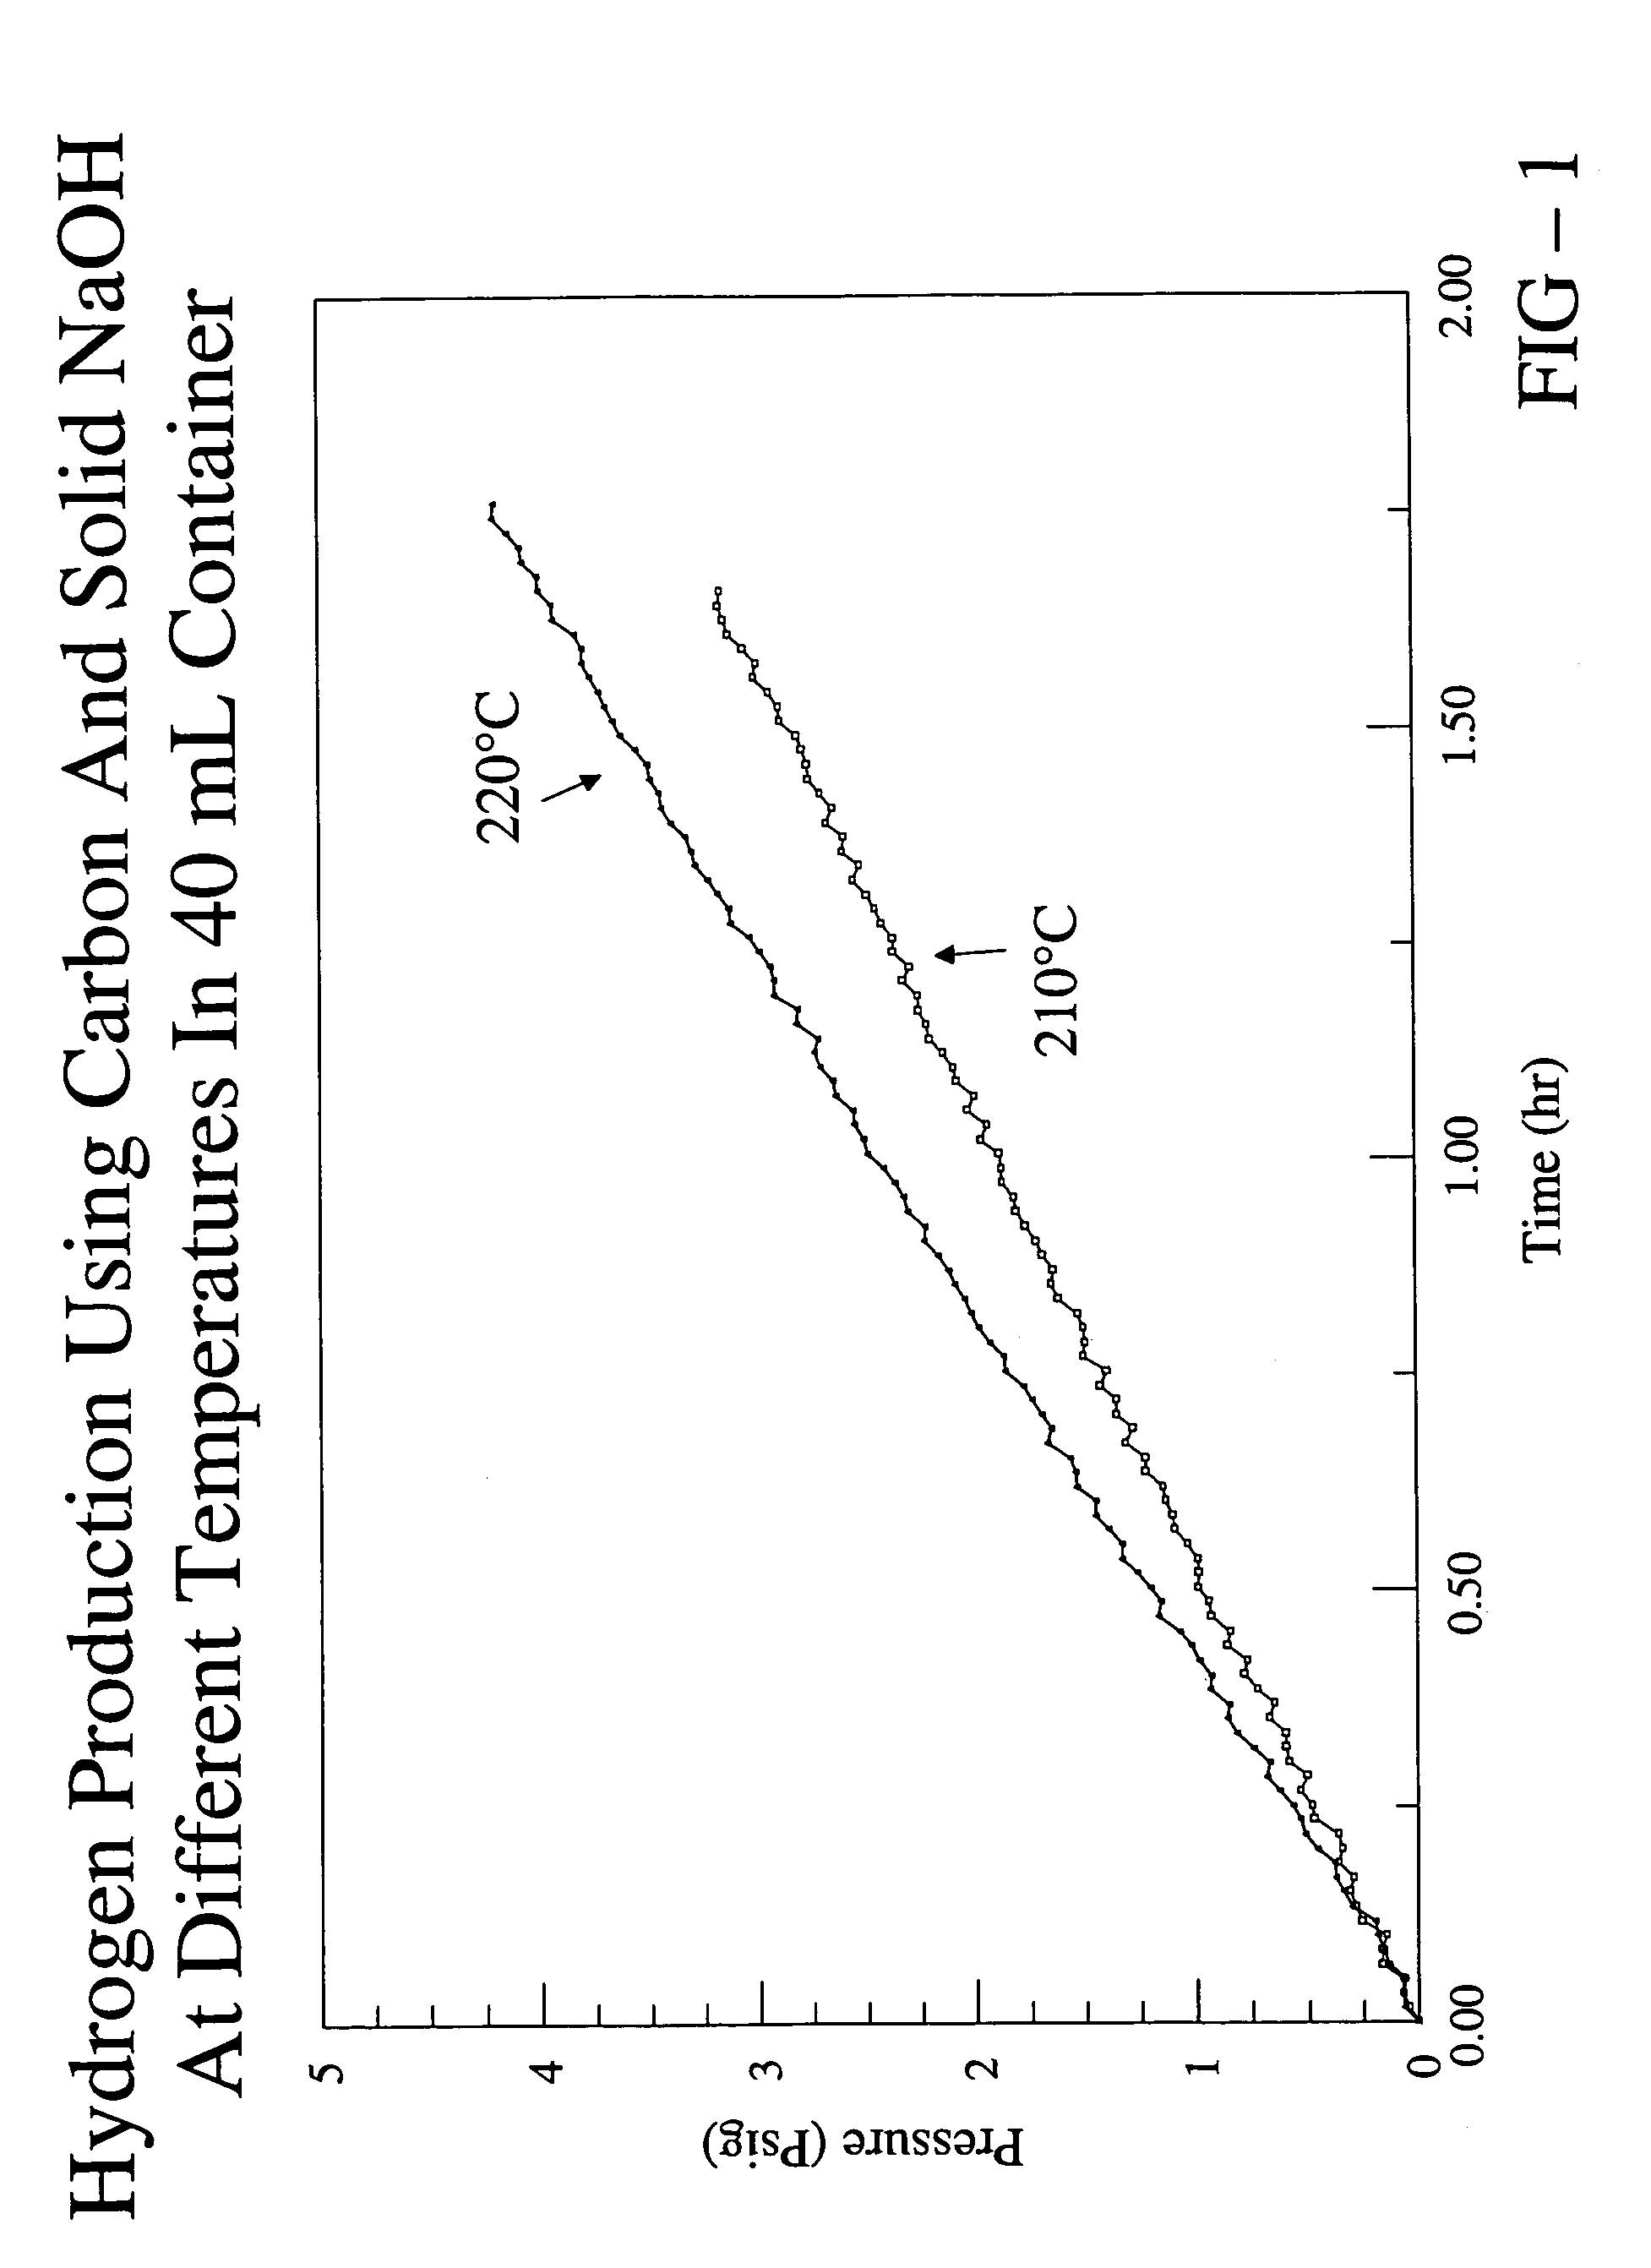 Base-facilitated production of hydrogen from carbonaceous matter